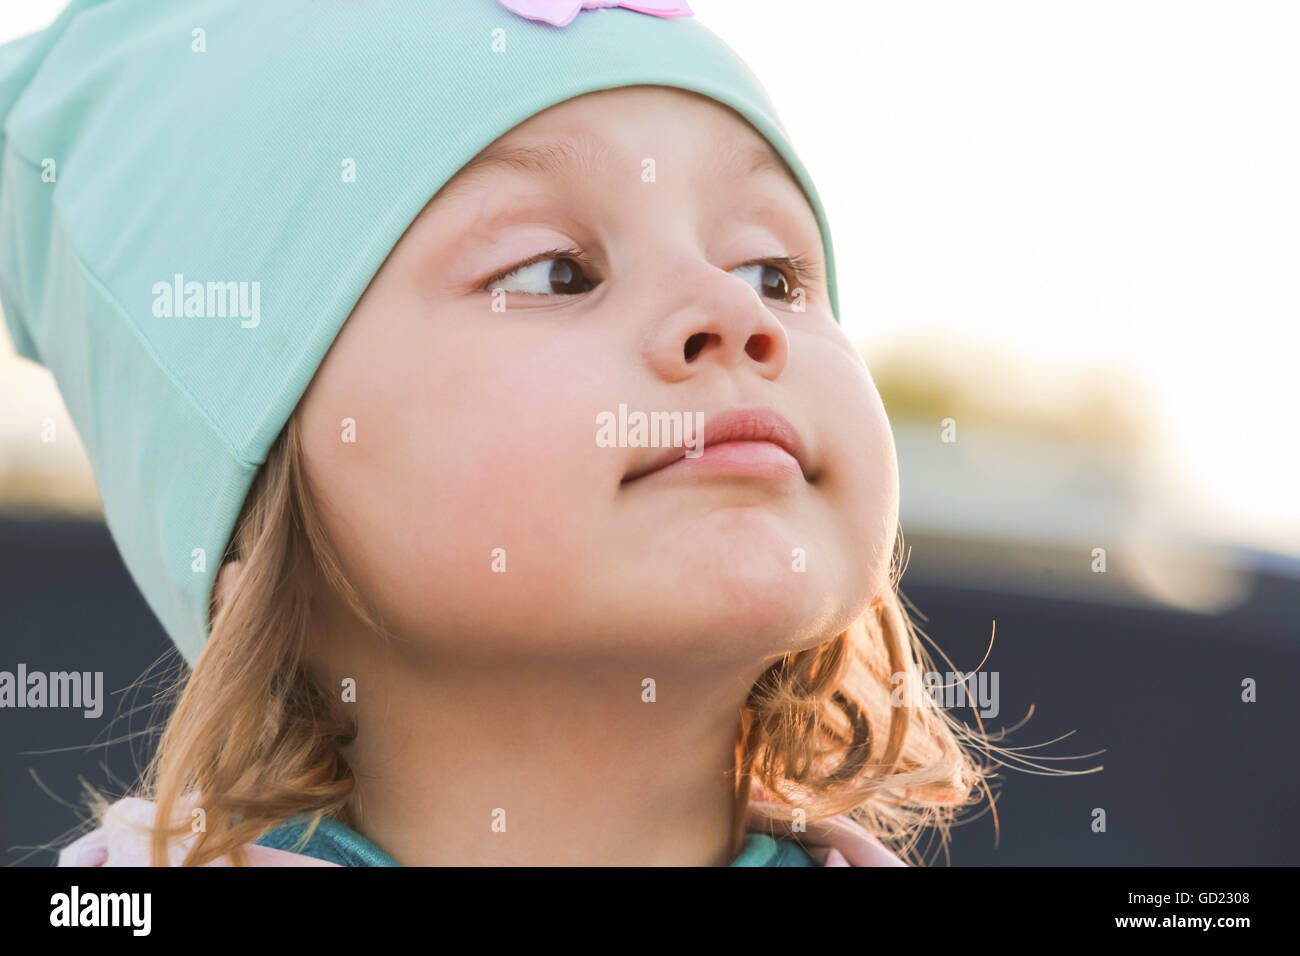 Closeup face portrait of funny cute Caucasian blond baby girl in green hat Stock Photo